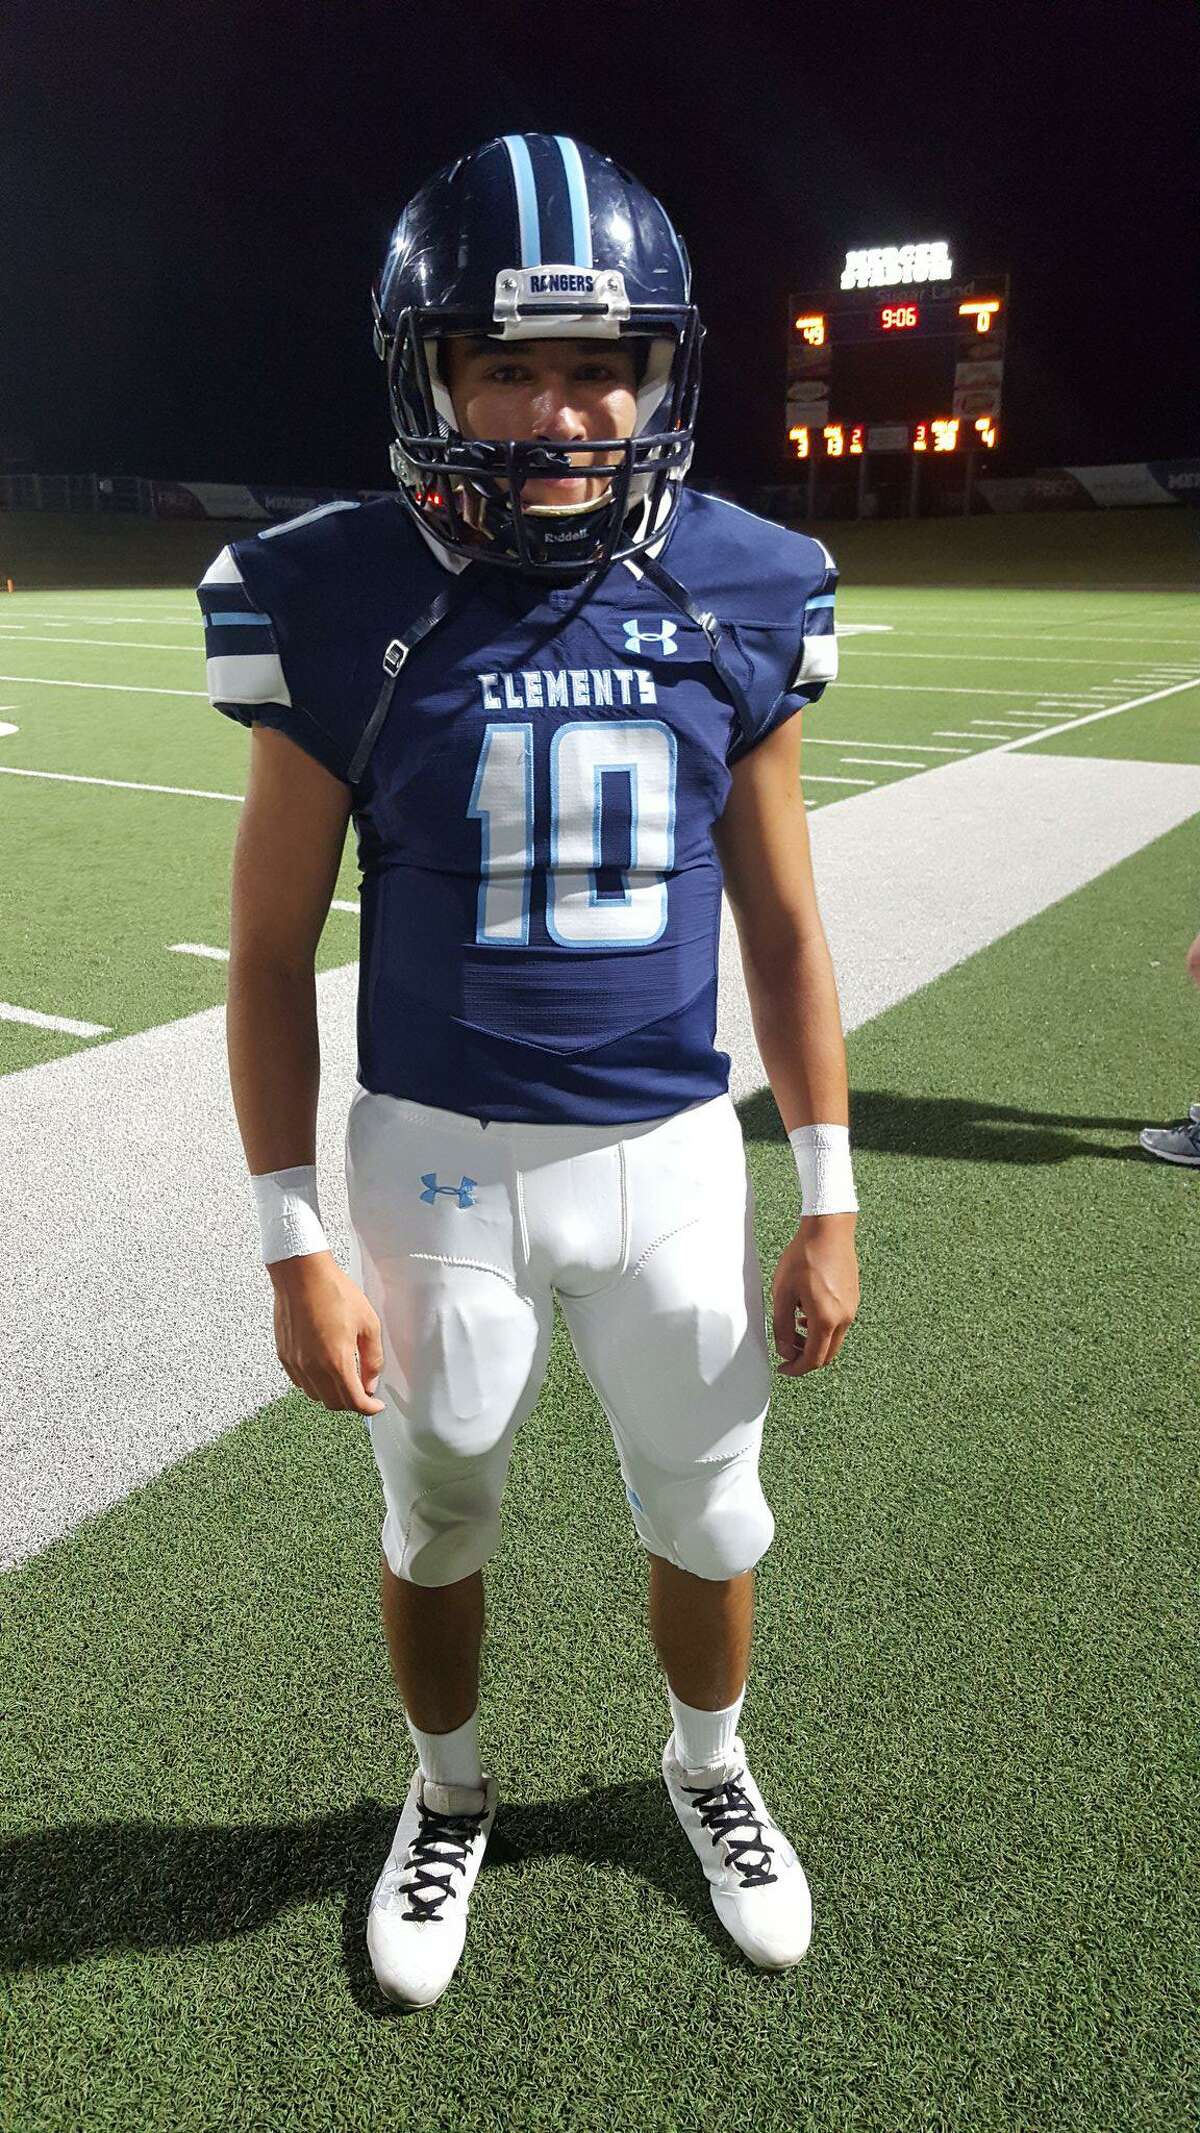 Clements senior James Sattler rushed for 204 yards and two touchdowns on only five carries as the Rangers improved to 2-0.